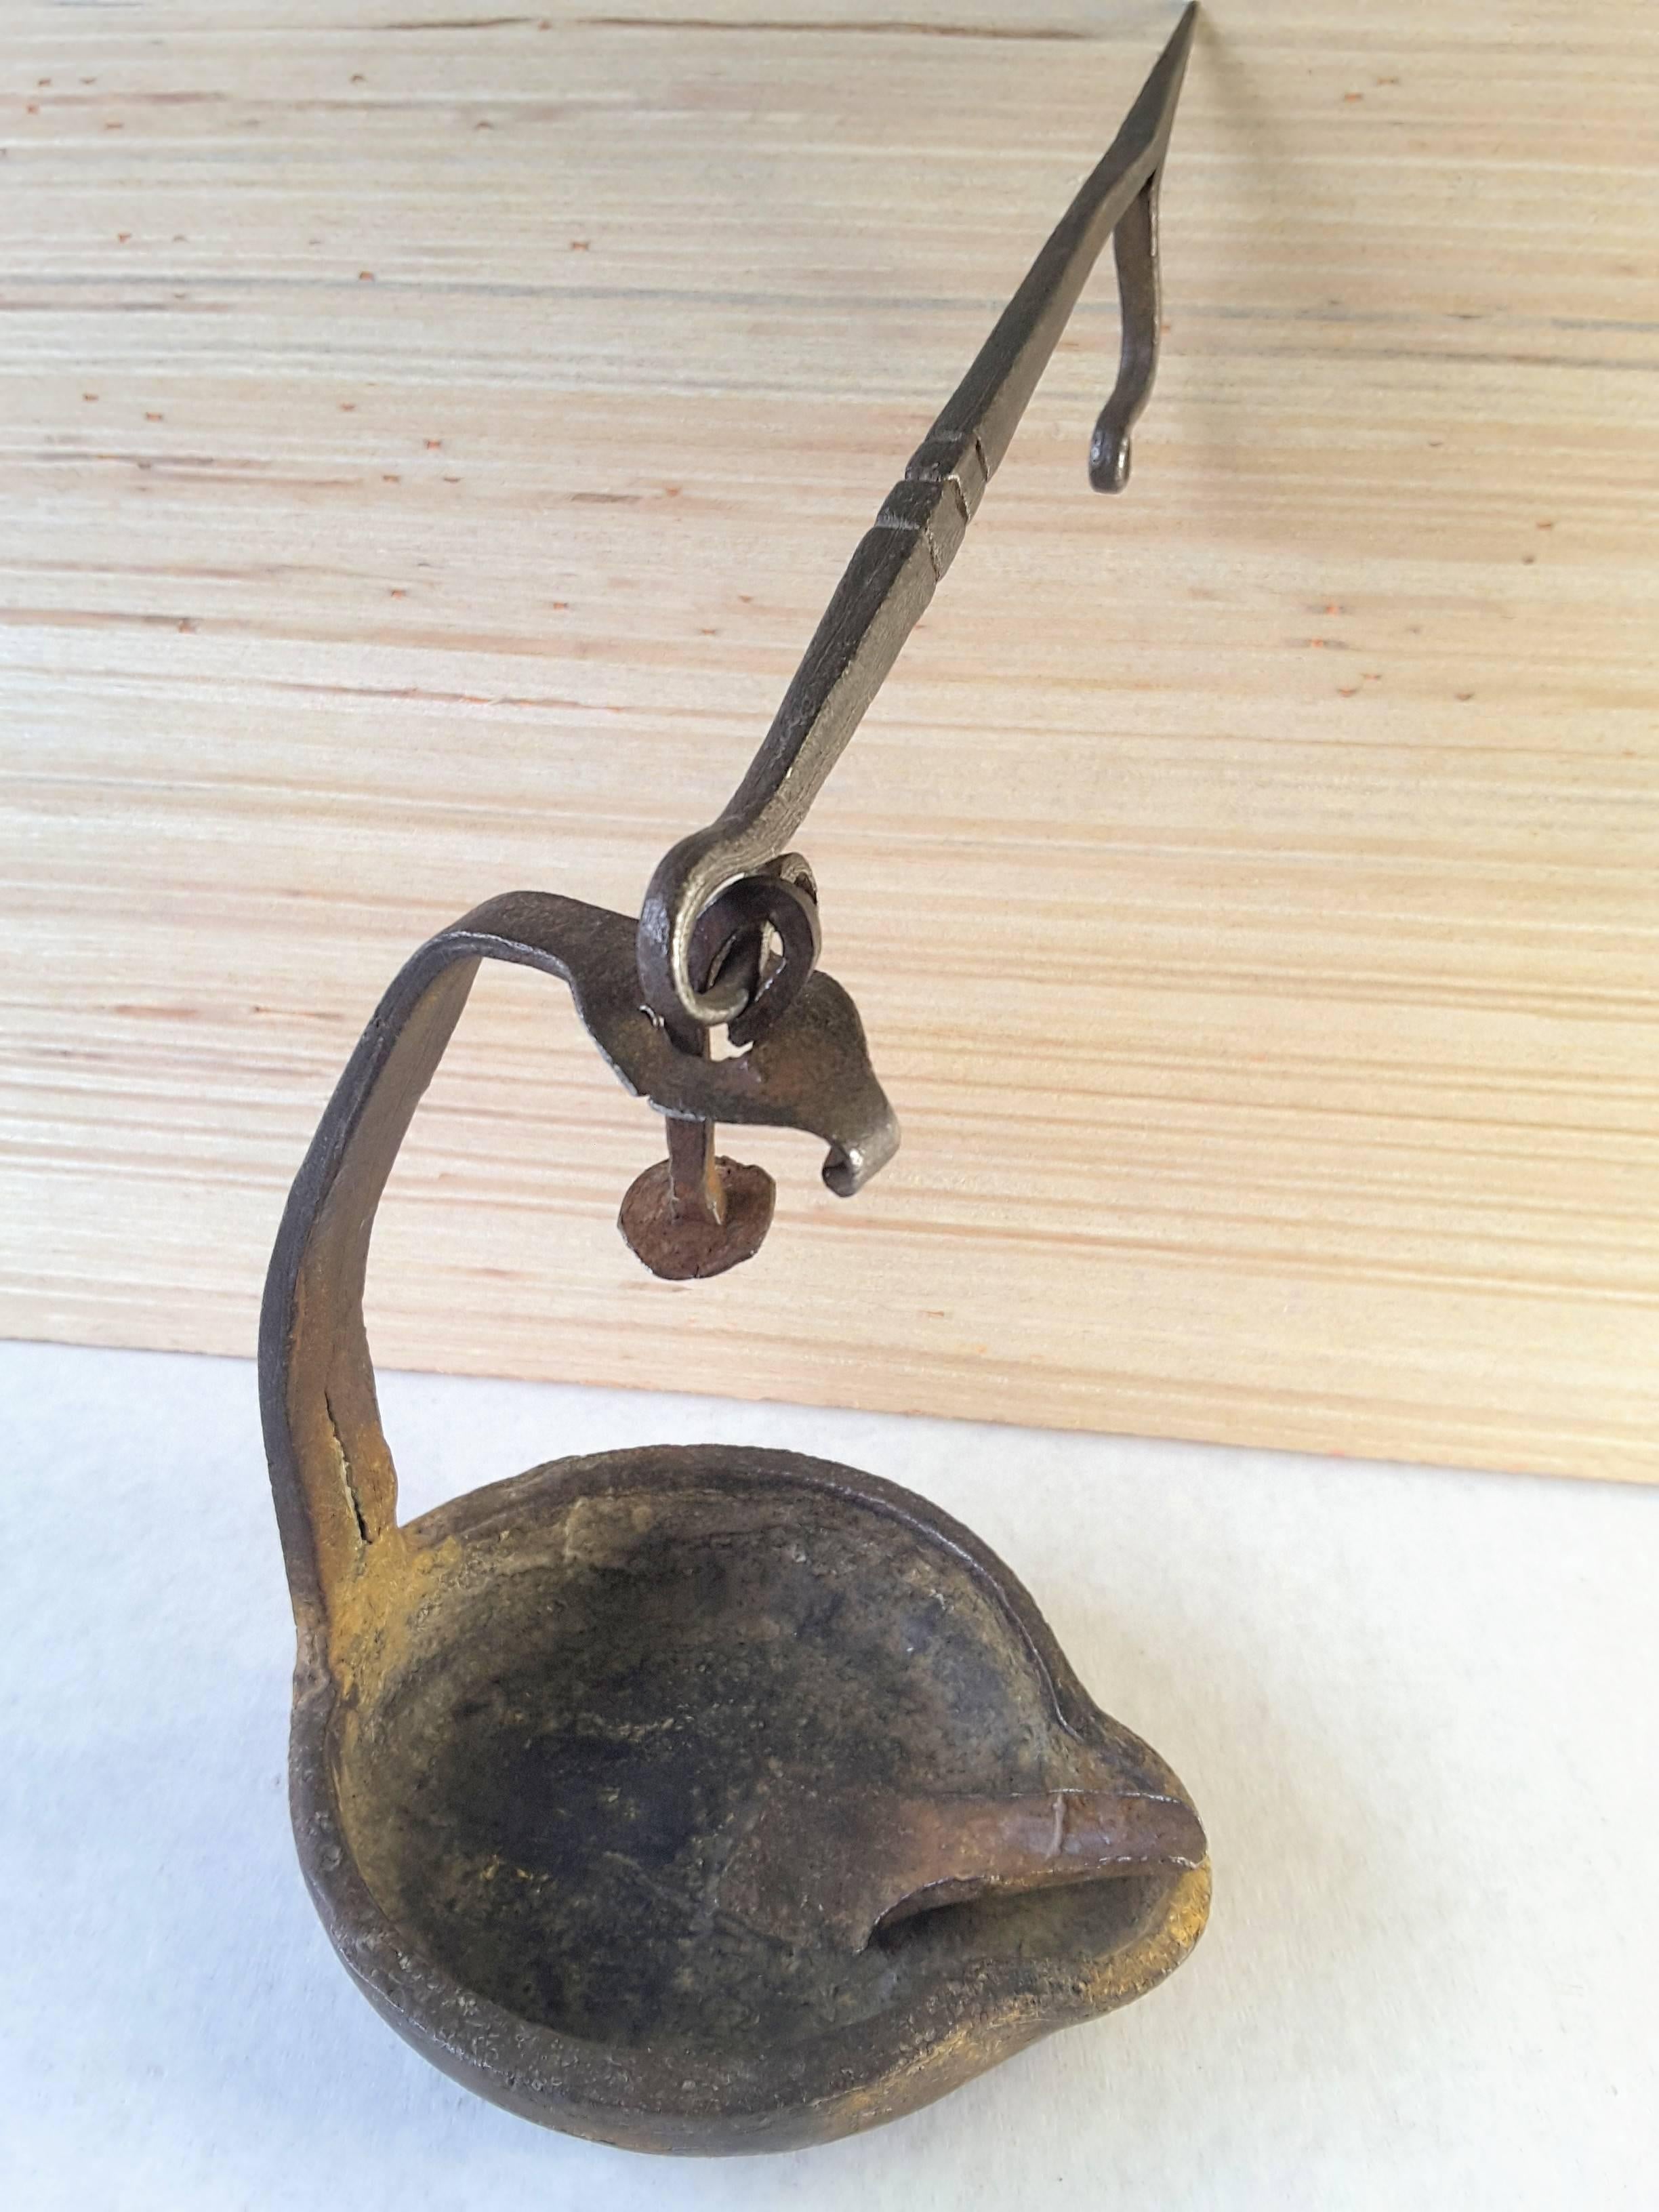 A late 18th-early 19th century swing post mount whale oil lamp, a fine example of a ships or wall/post mount whale oil lamp, which swings from the top as the spike is fixed to a post or wall to avoid spilling the oil from a rocking ship or by